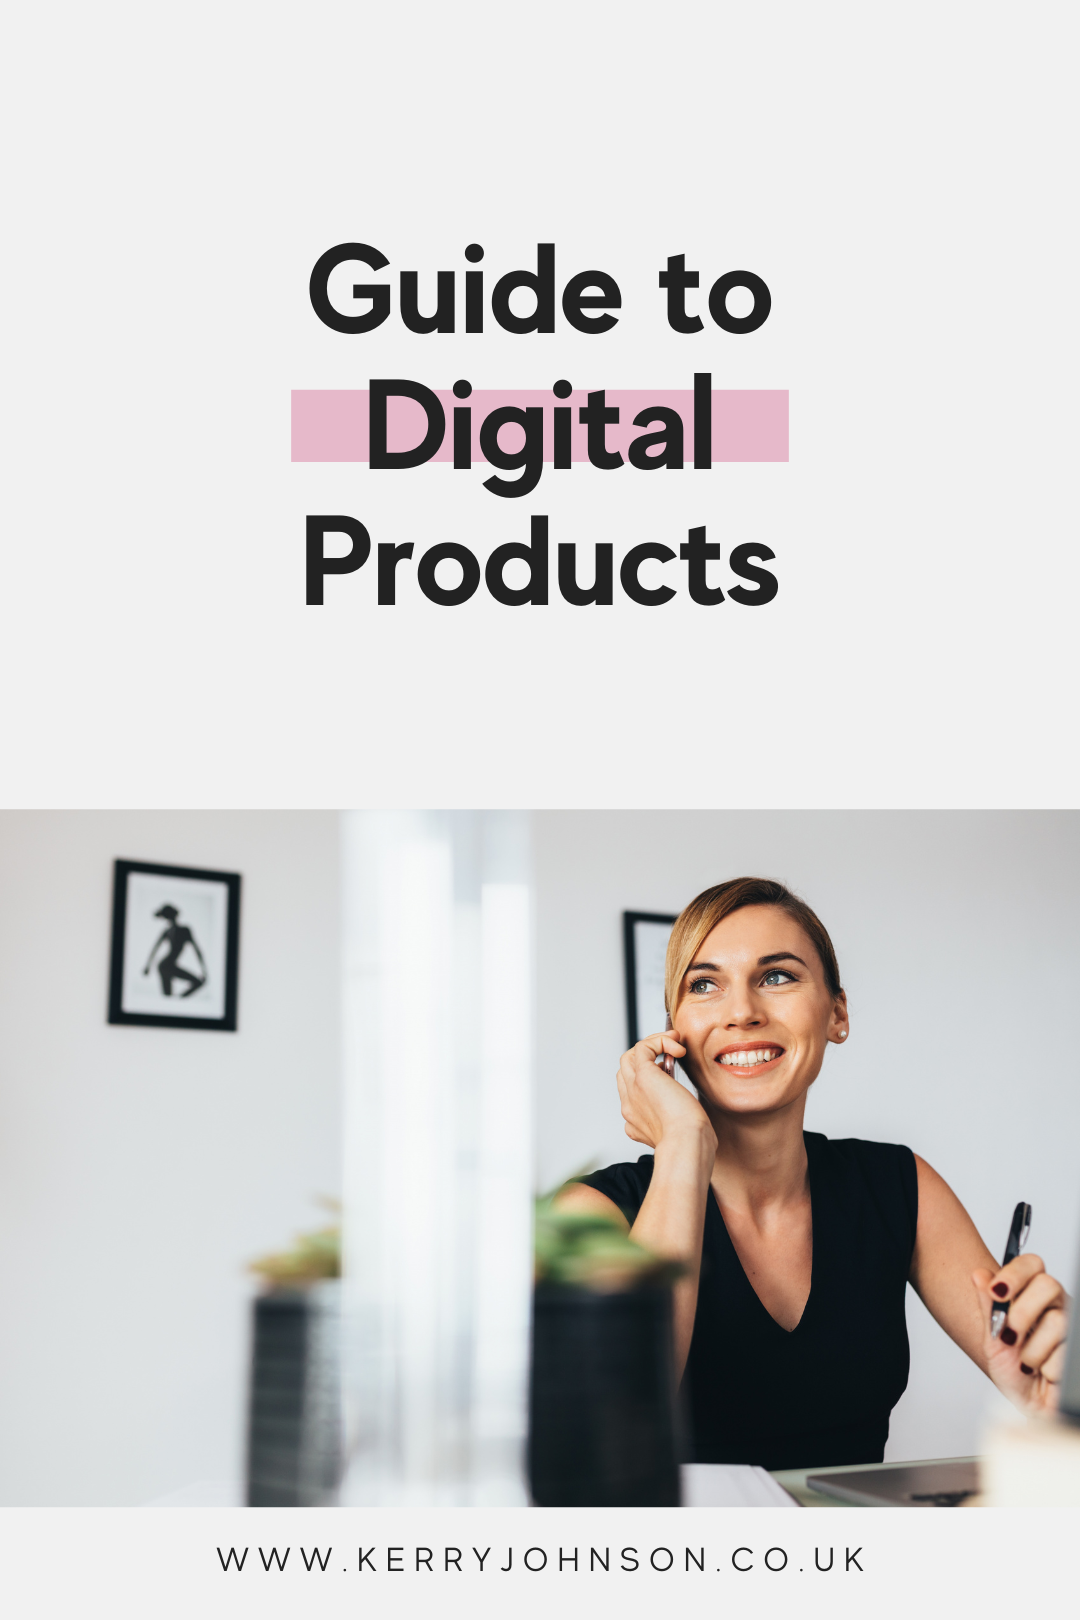 Guide to Digital Products | Kerry Johnson - Digital Business Coach